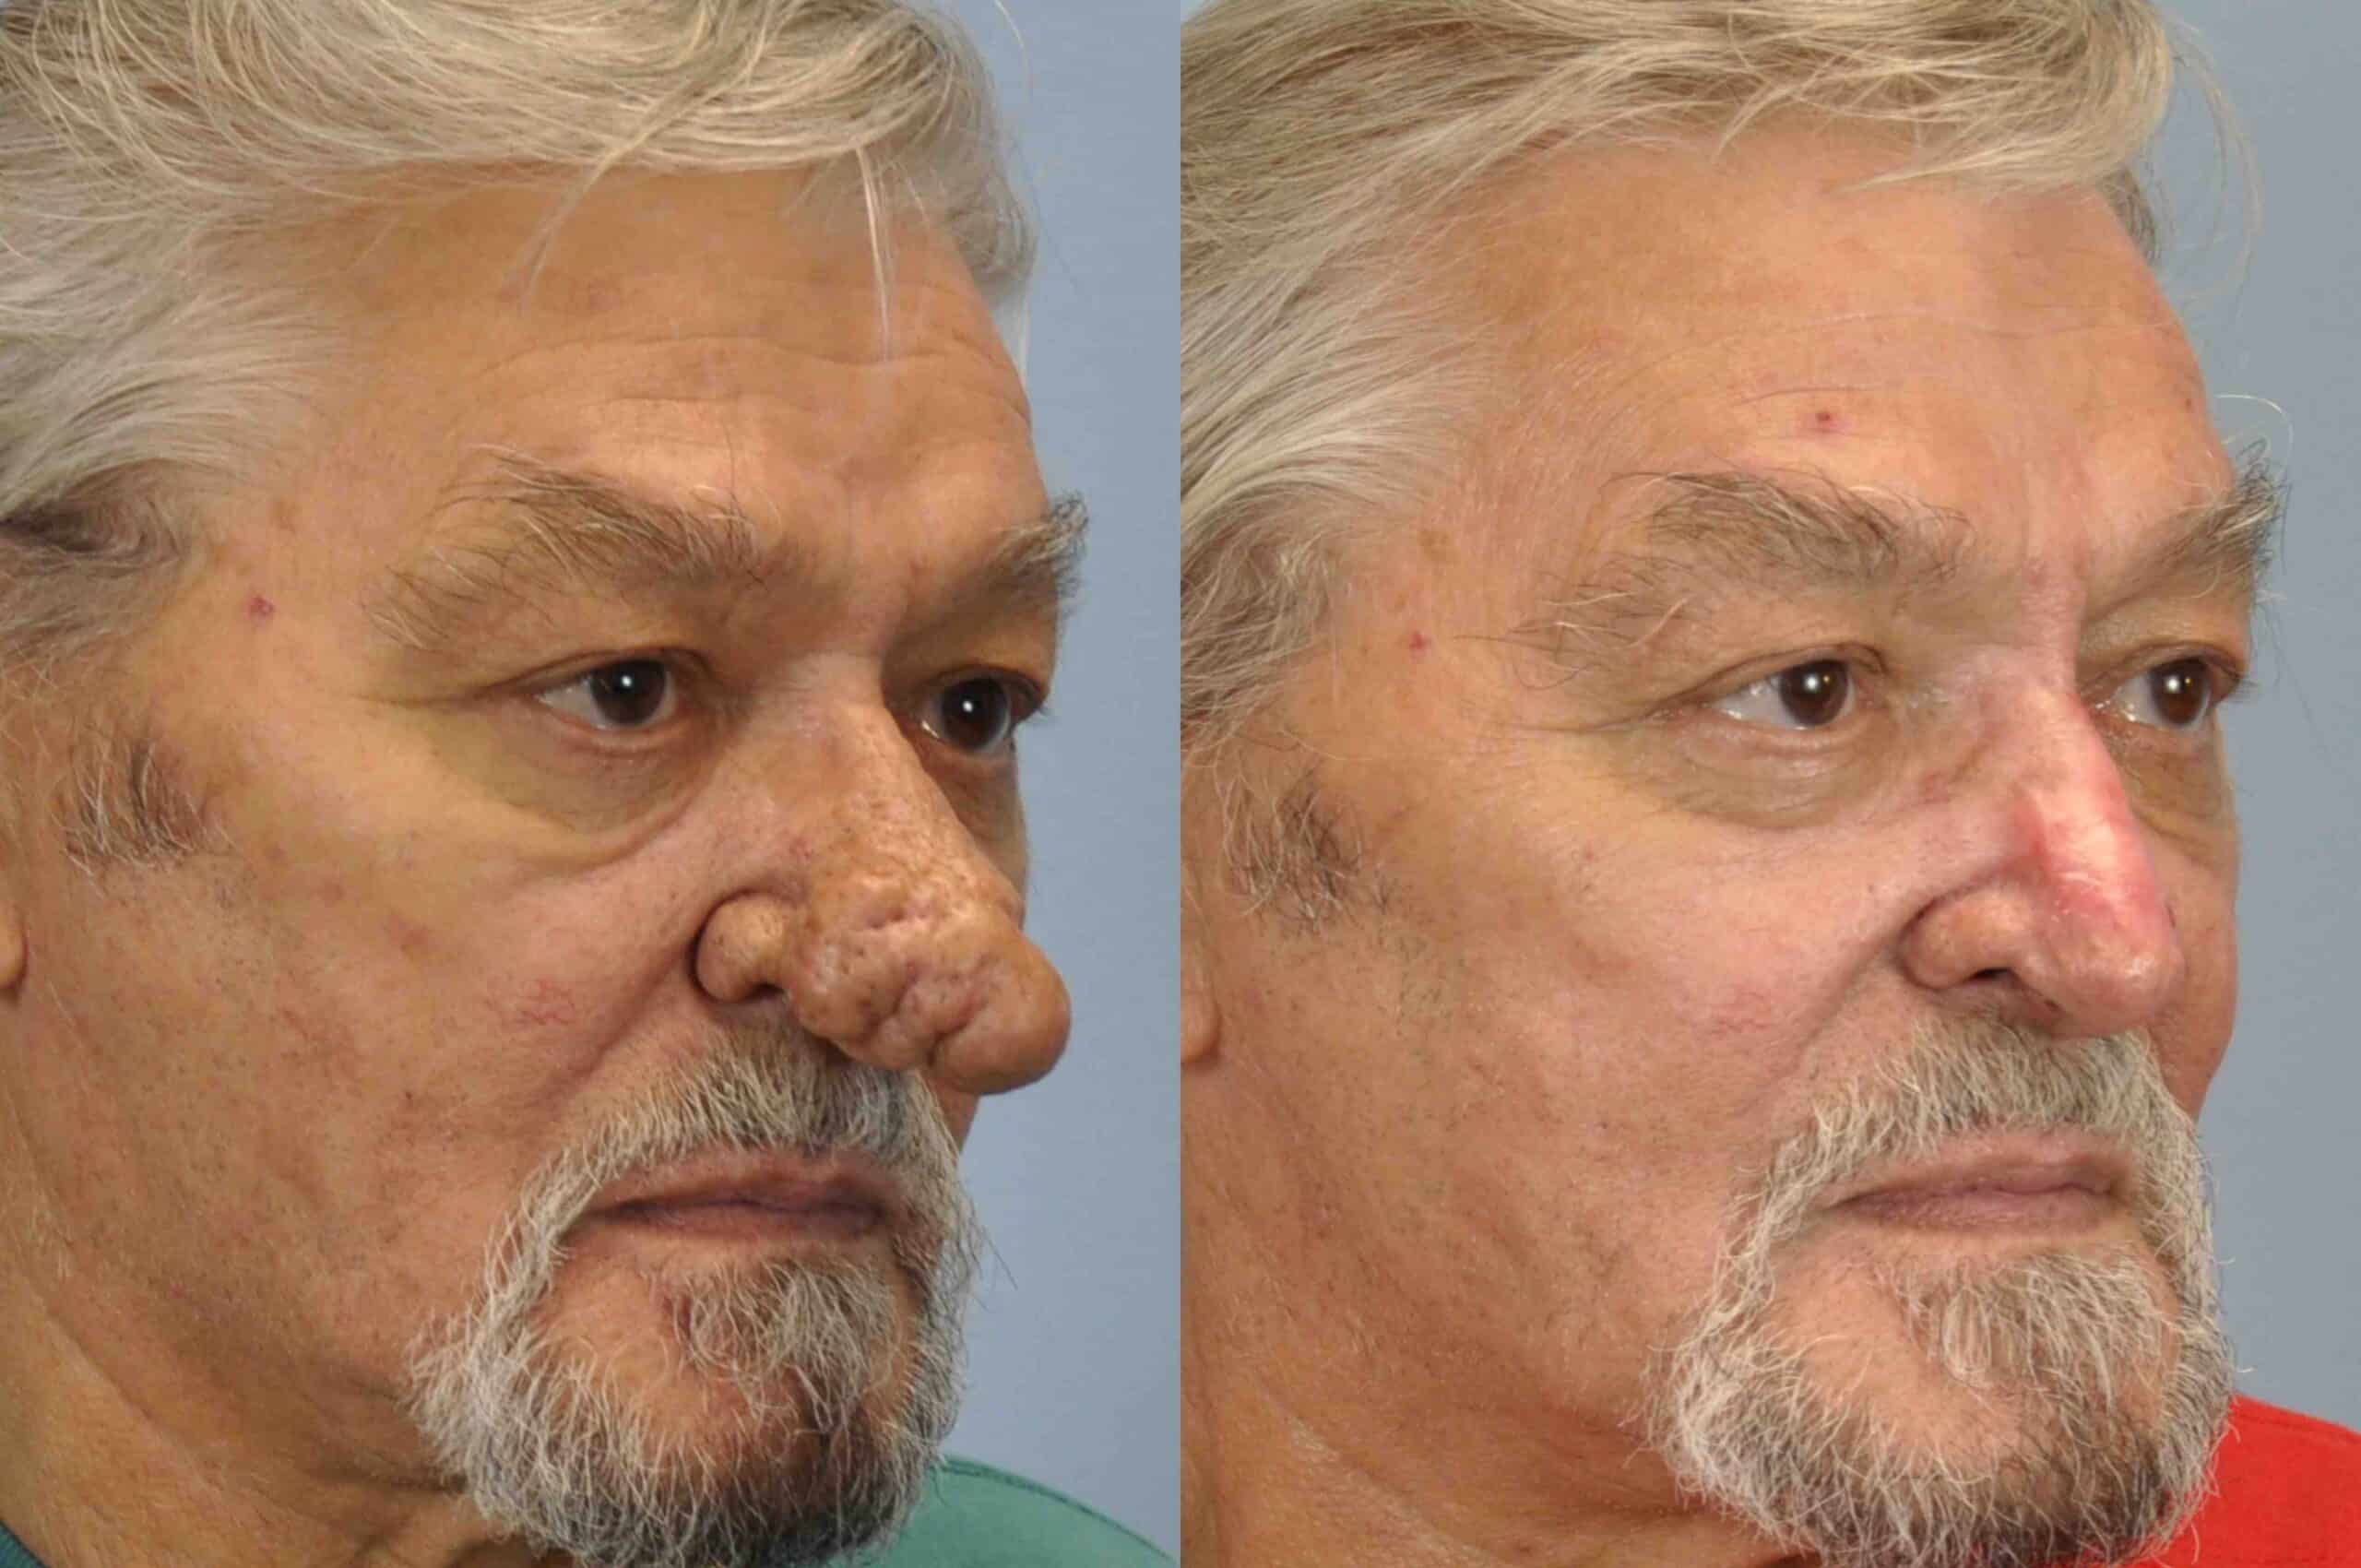 Before and after, 11 mo post op from Rhinoplasty, Rhinophyma performed by Dr. Paul Vanek